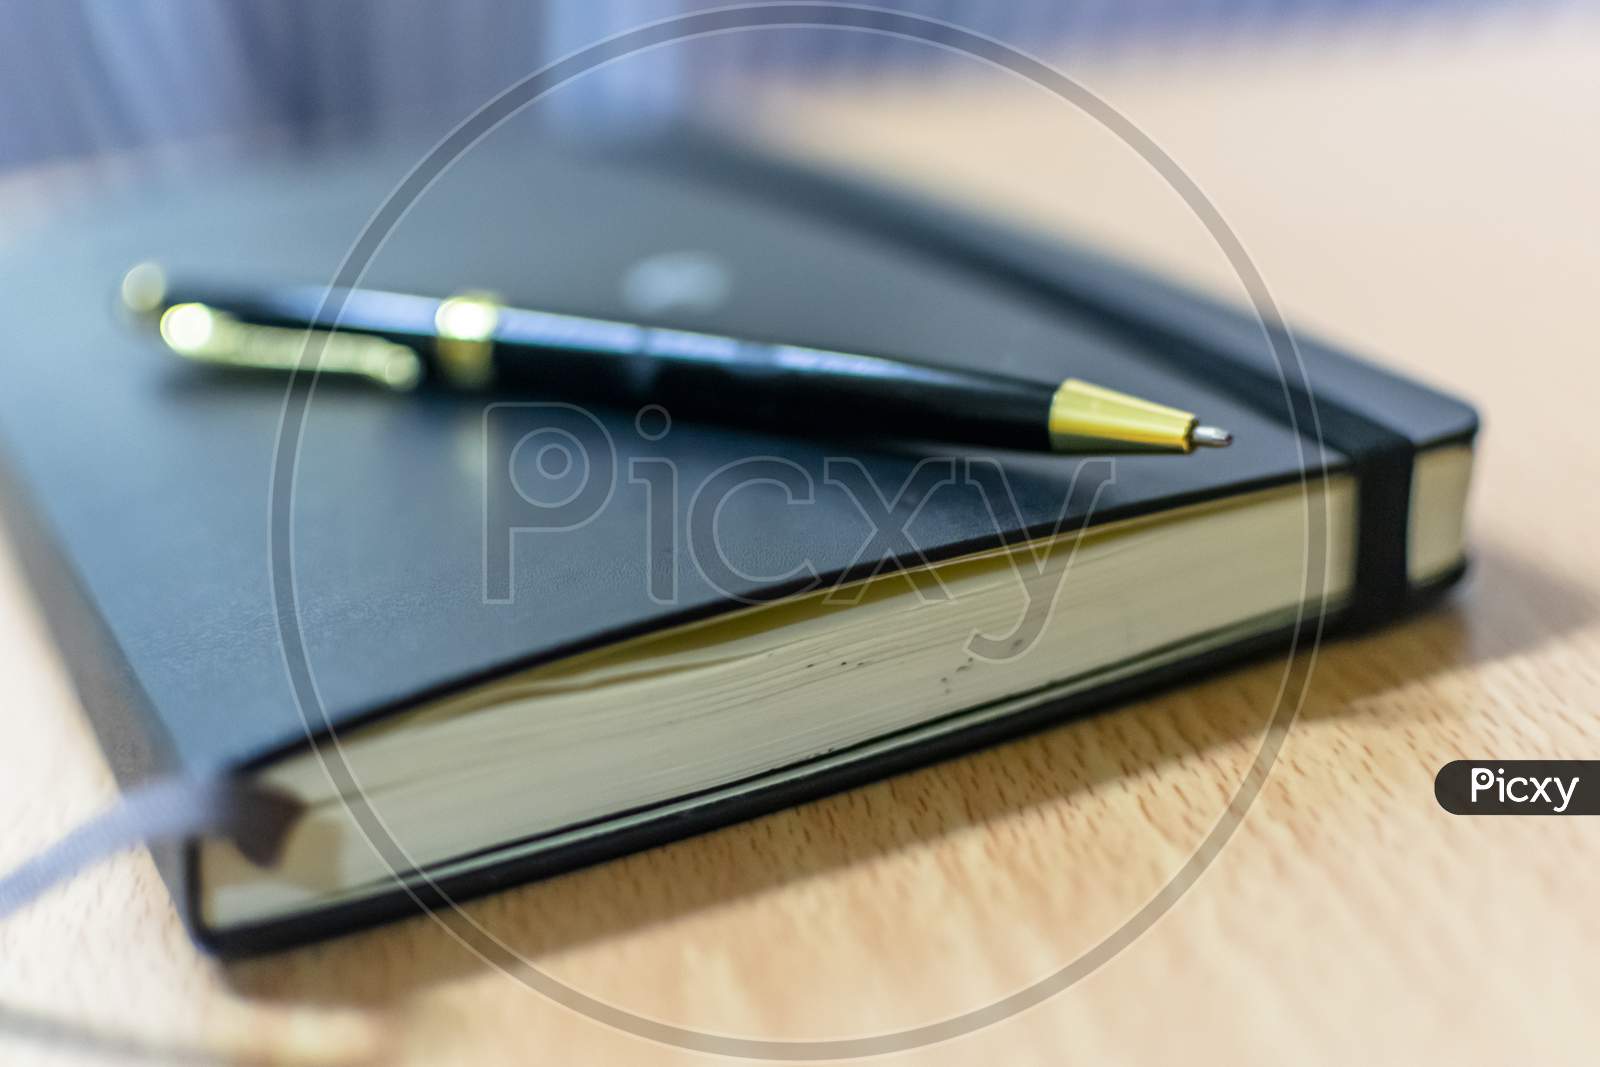 A Note Book And A Black Pen On An Office Table